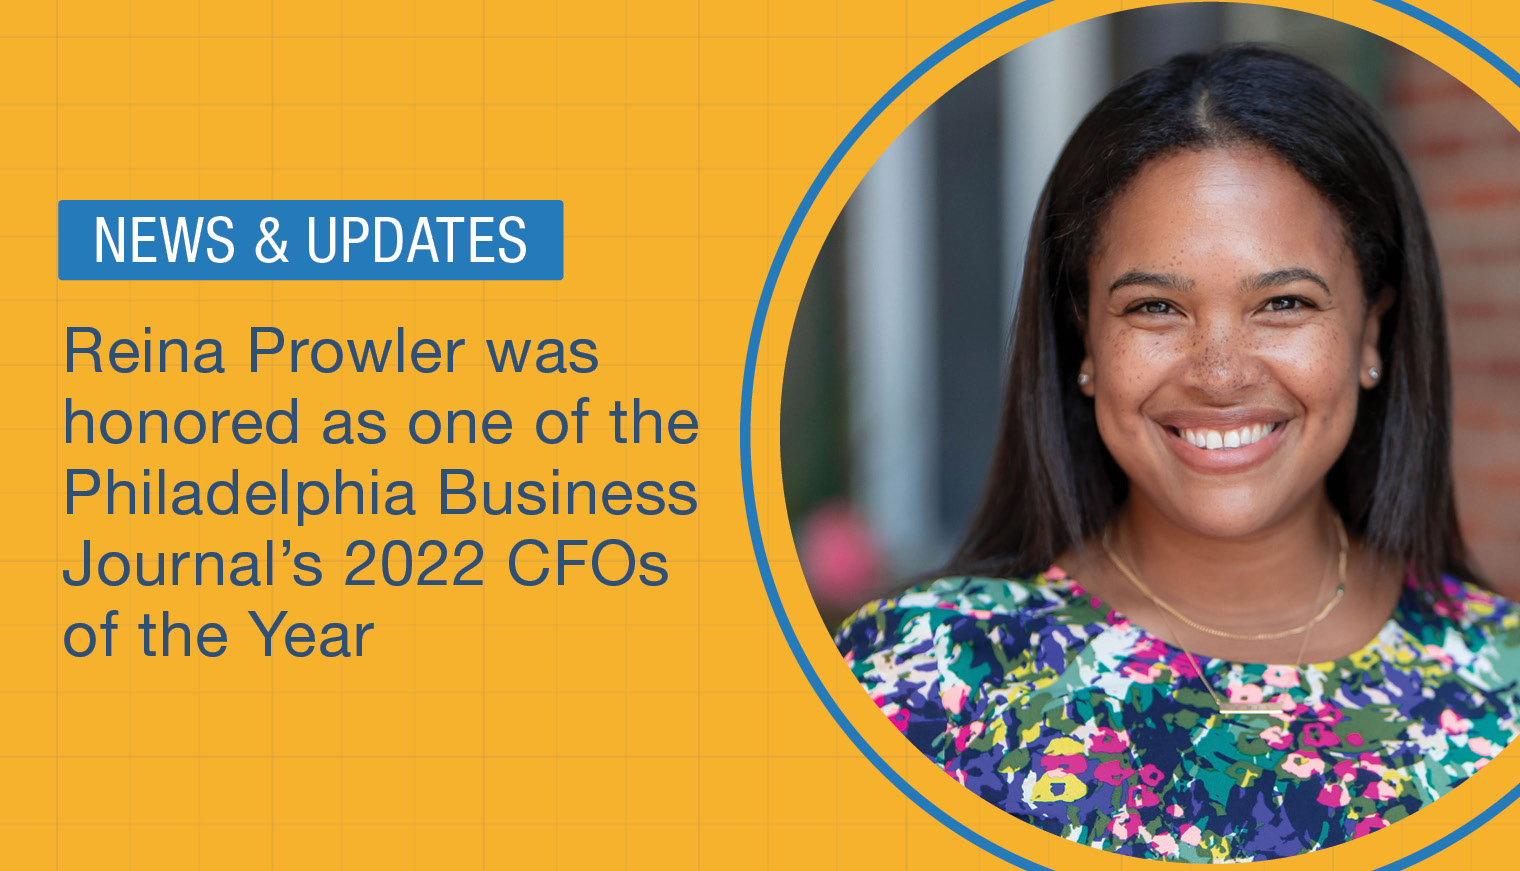 Featured image for “Reina Prowler Honored as one of the Philadelphia Business Journal’s 2022 CFOs of the Year”